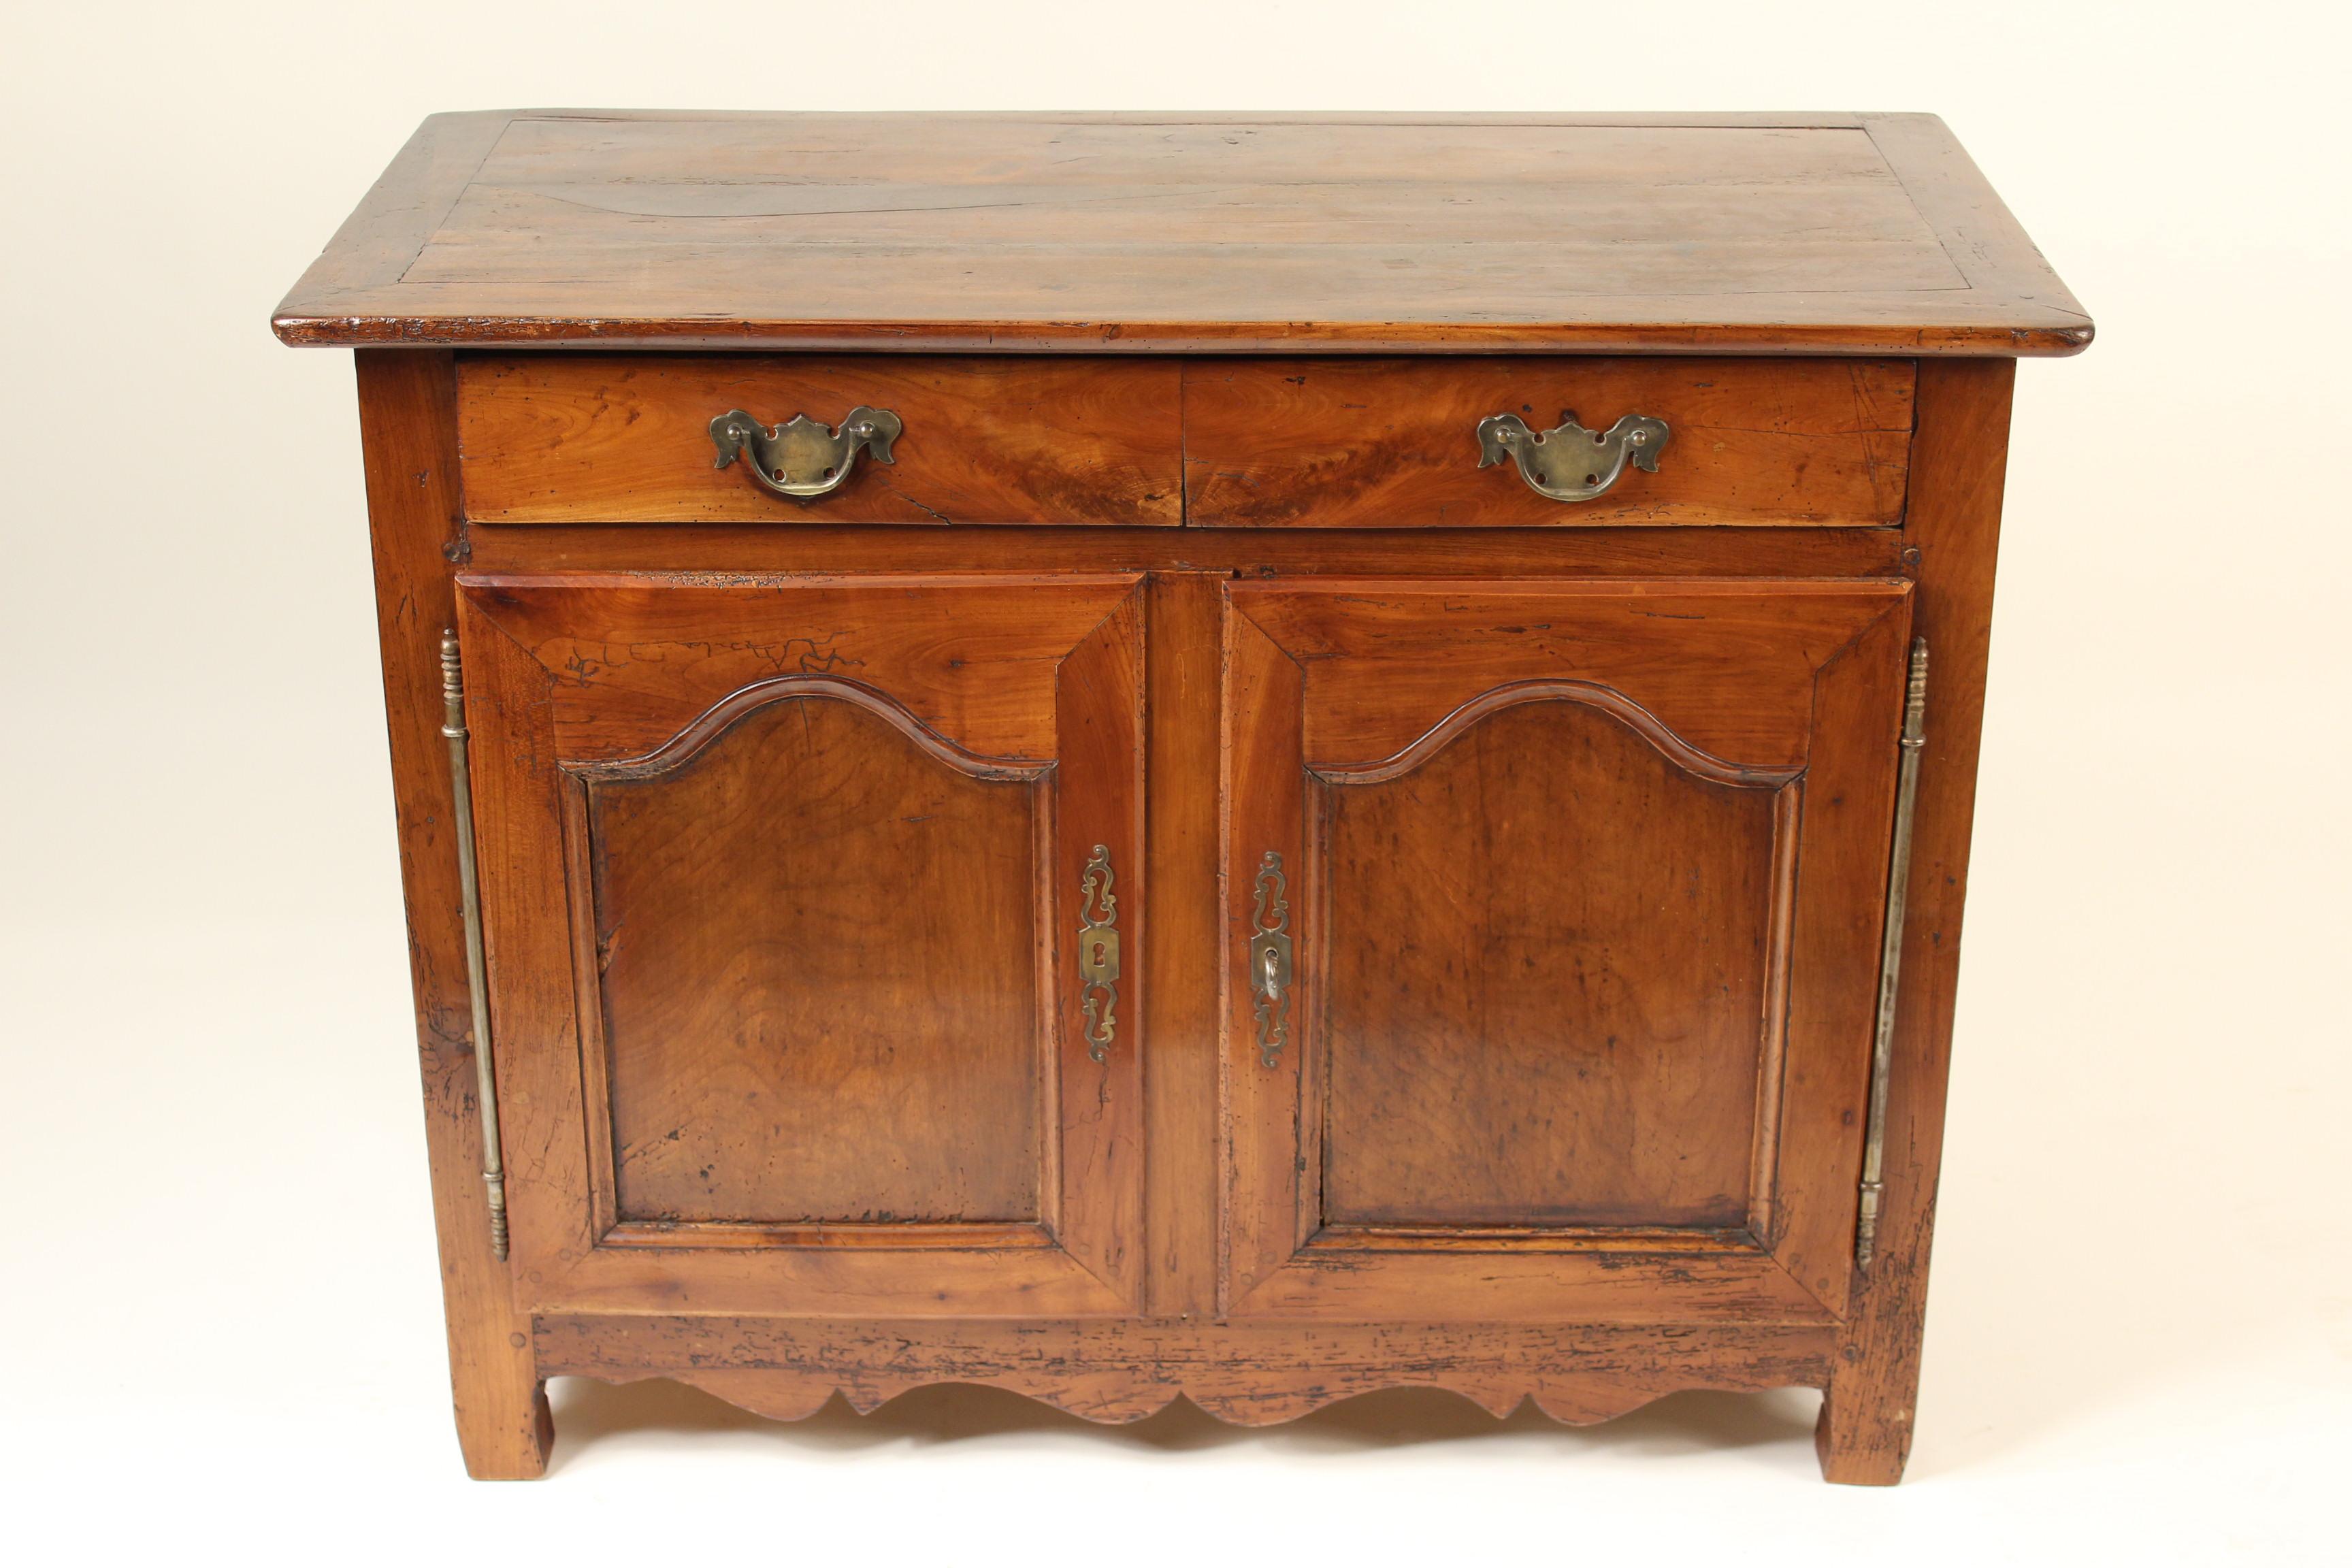 Small scale Louis XV Provincial walnut buffet / cabinet, either 18th century and extensively restored or made from 18th century elements.